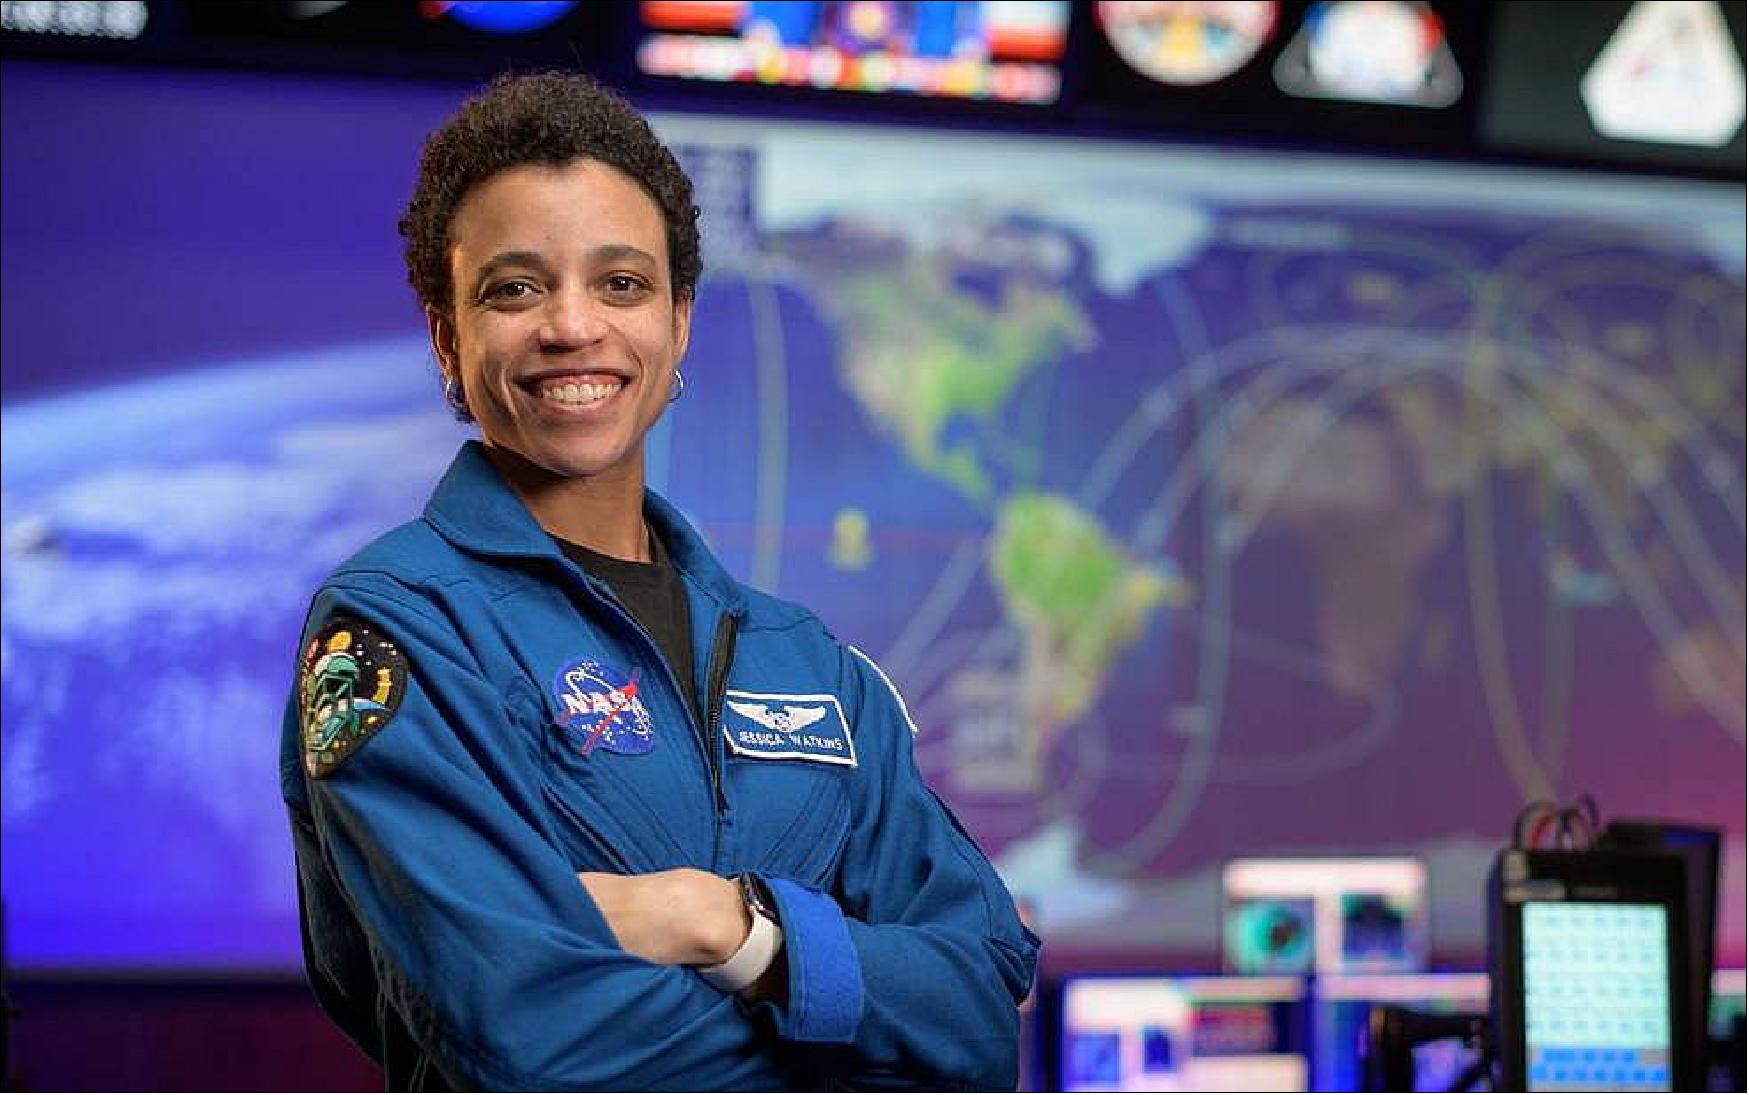 Figure 8: NASA astronaut Jessica Watkins is scheduled to fly to space for the first time as part of NASA’s SpaceX Crew-4 mission launching to the International Space Station (image credit: NASA, Bill Ingalls)